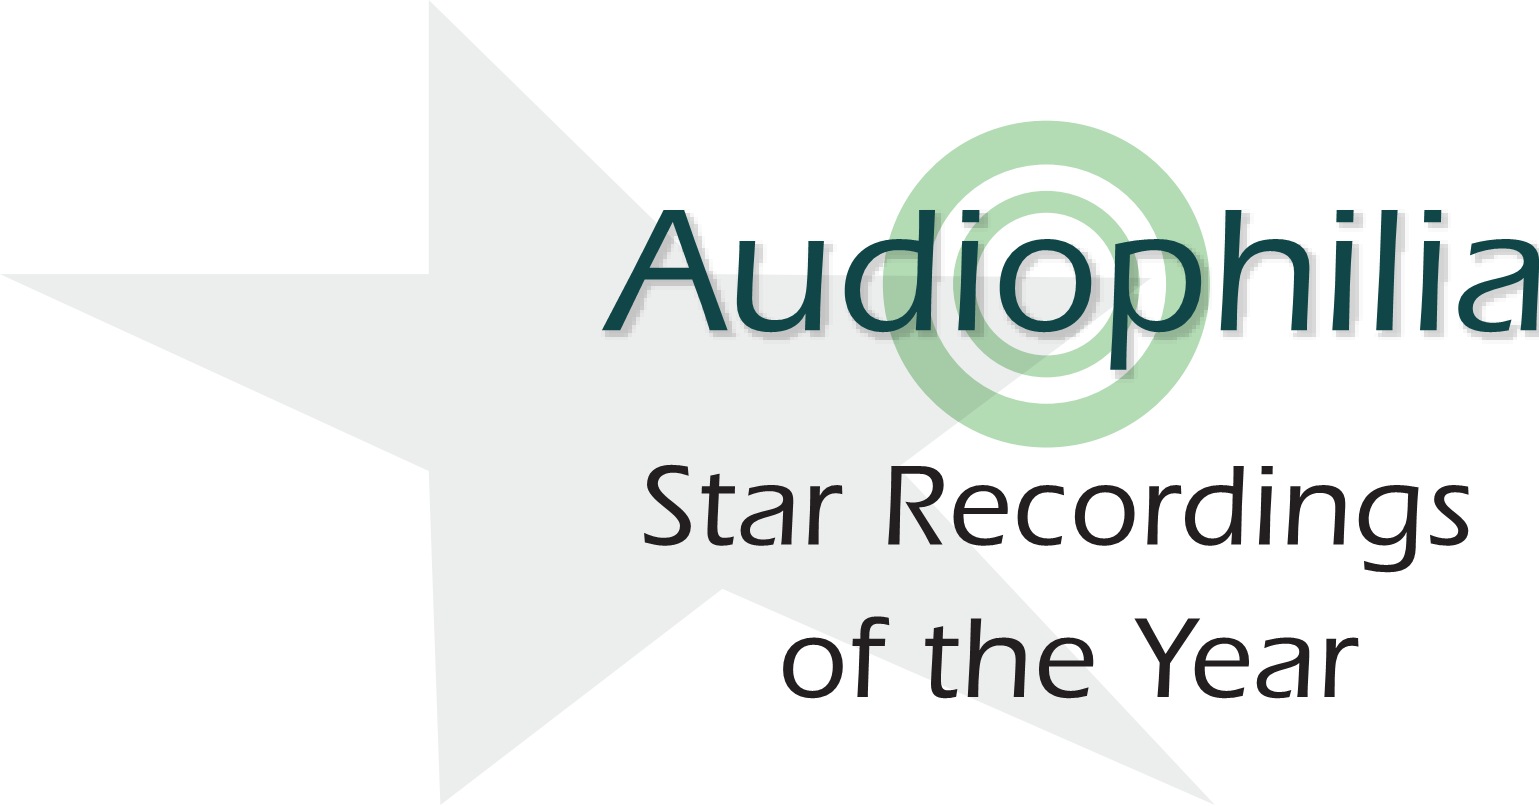 Audiophilia: 'Star Recordings of the Year' (2012)